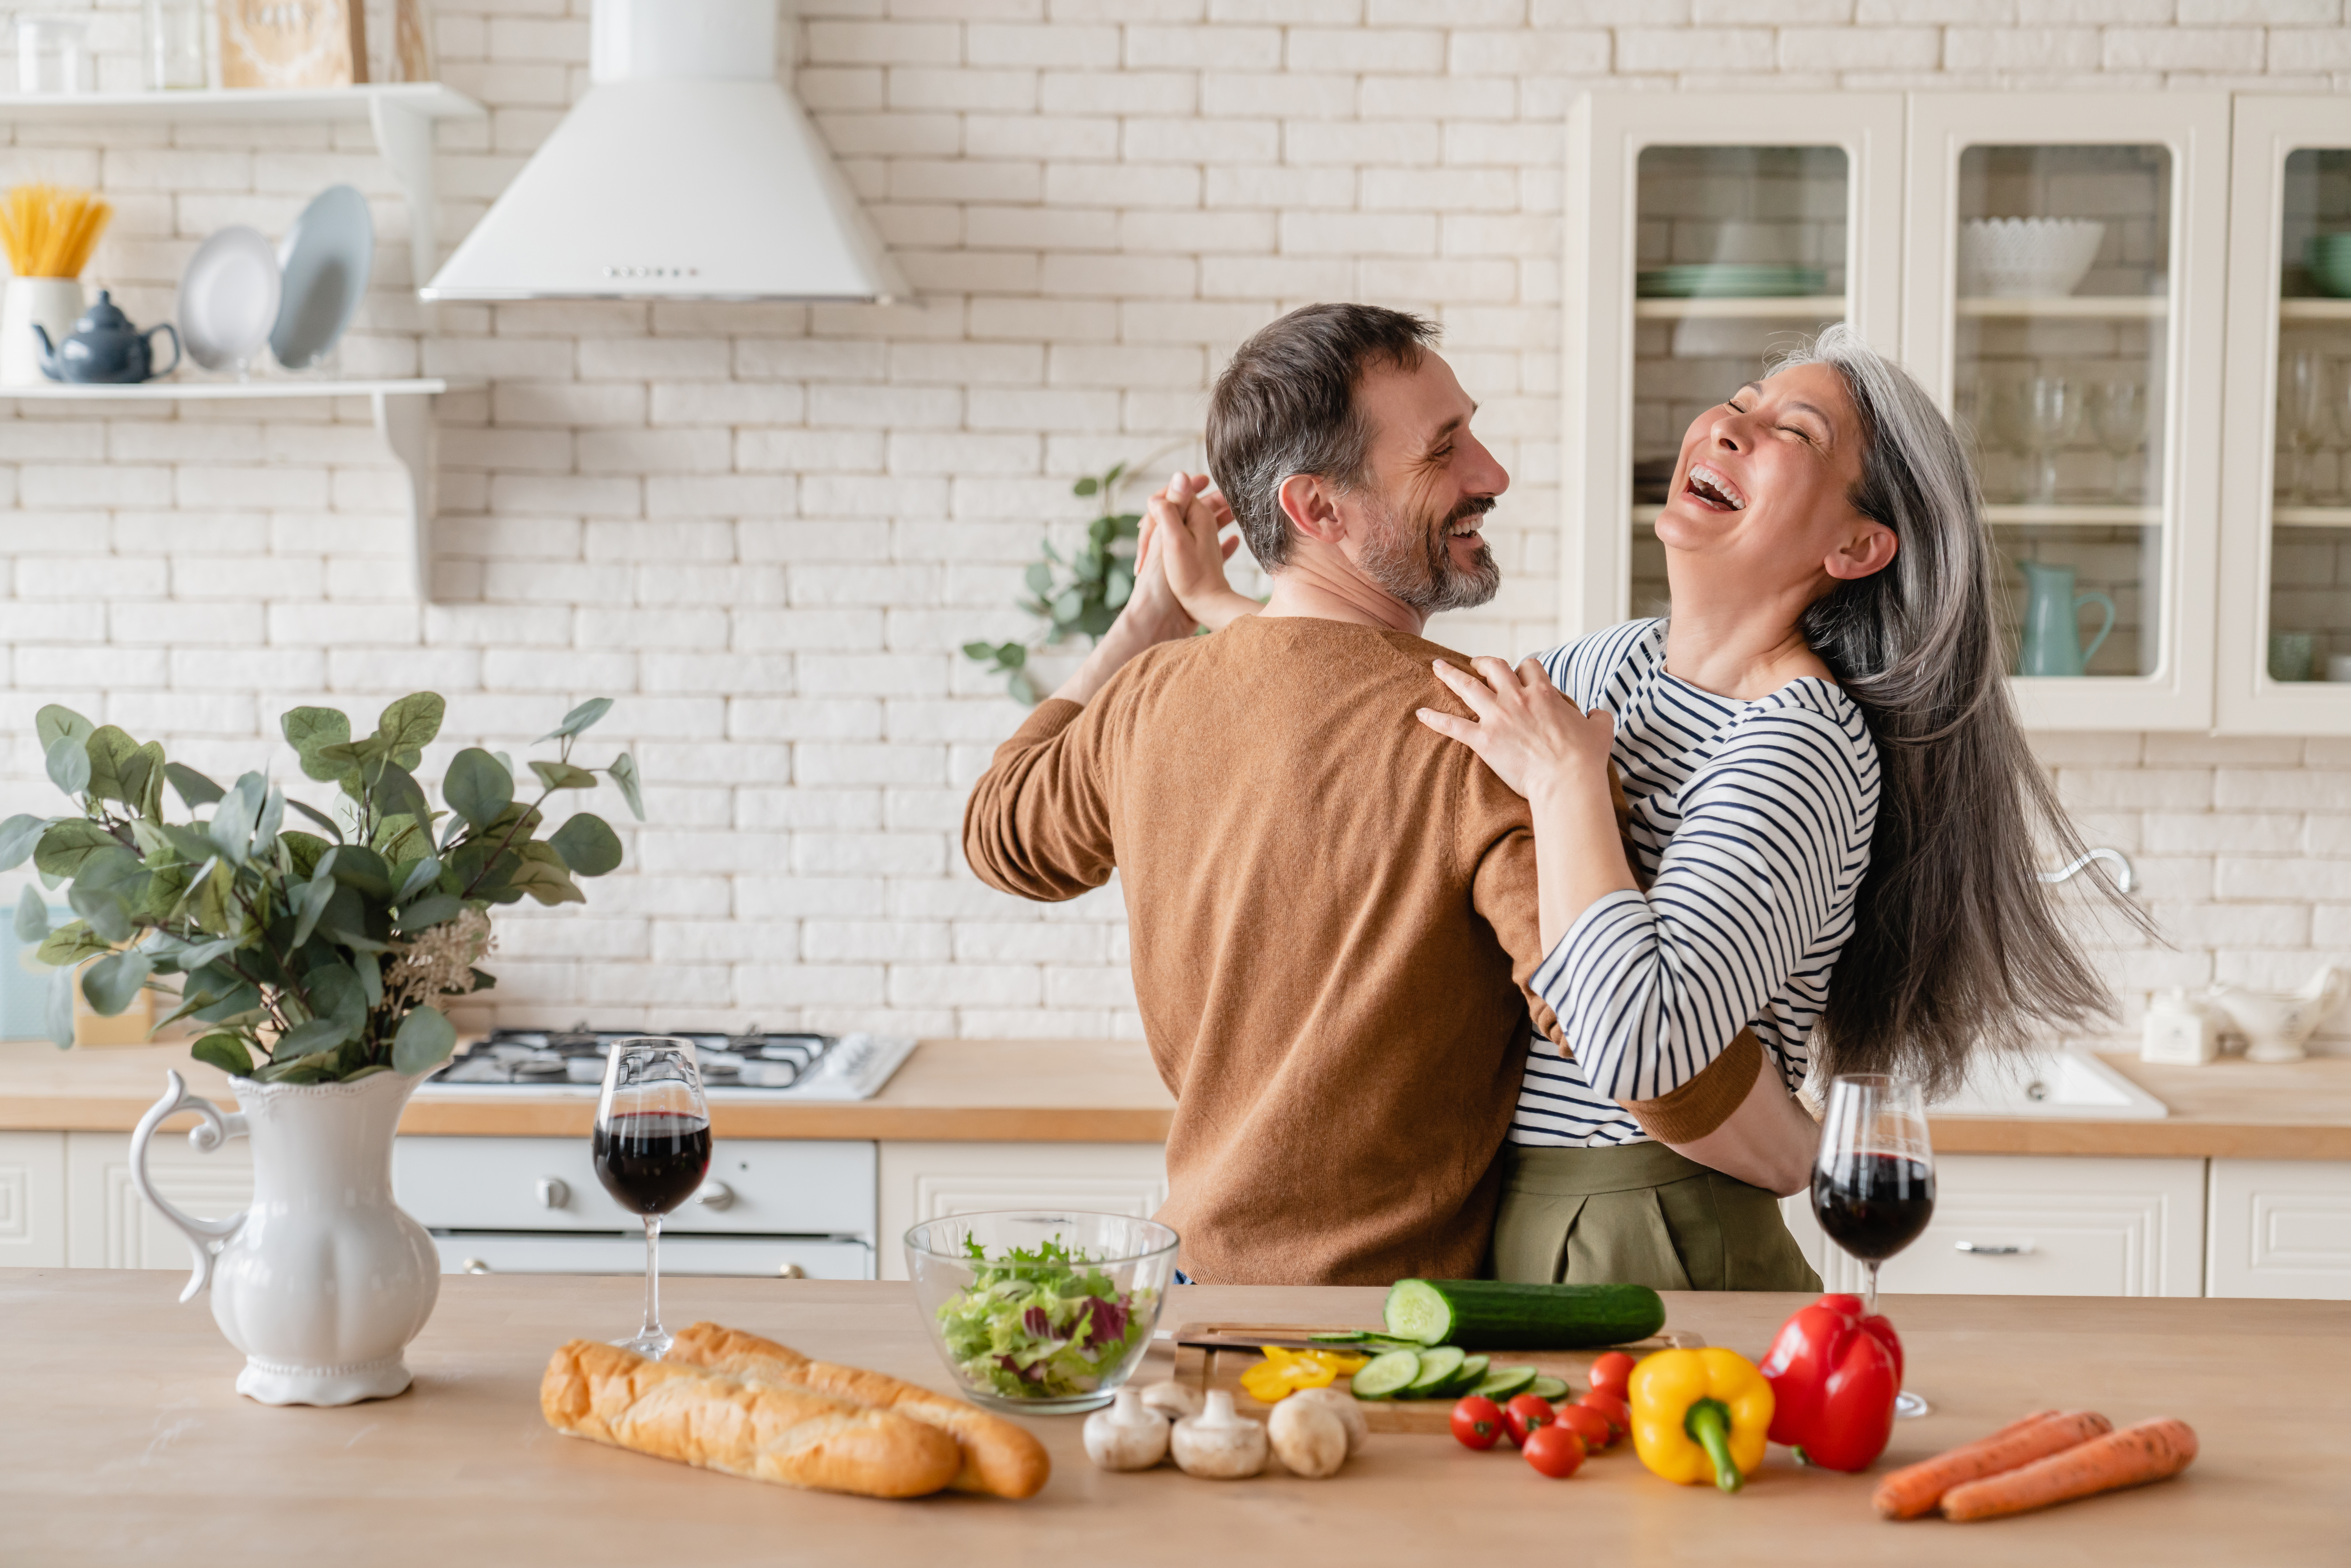 Cheerful middle-aged couple dancing while preparing a meal together